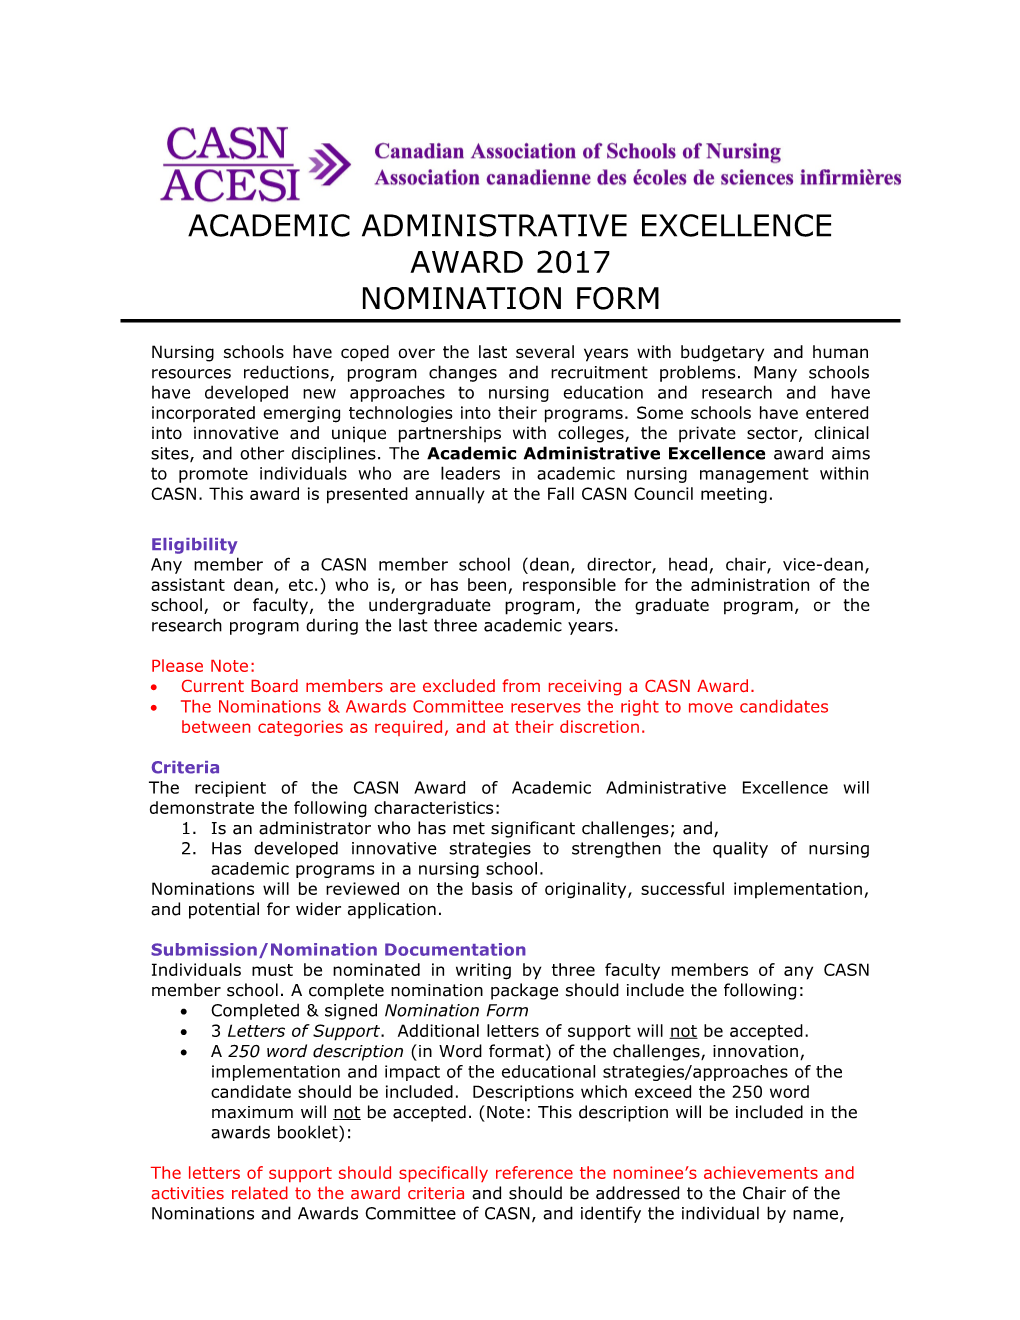 Academic Administrative Excellence